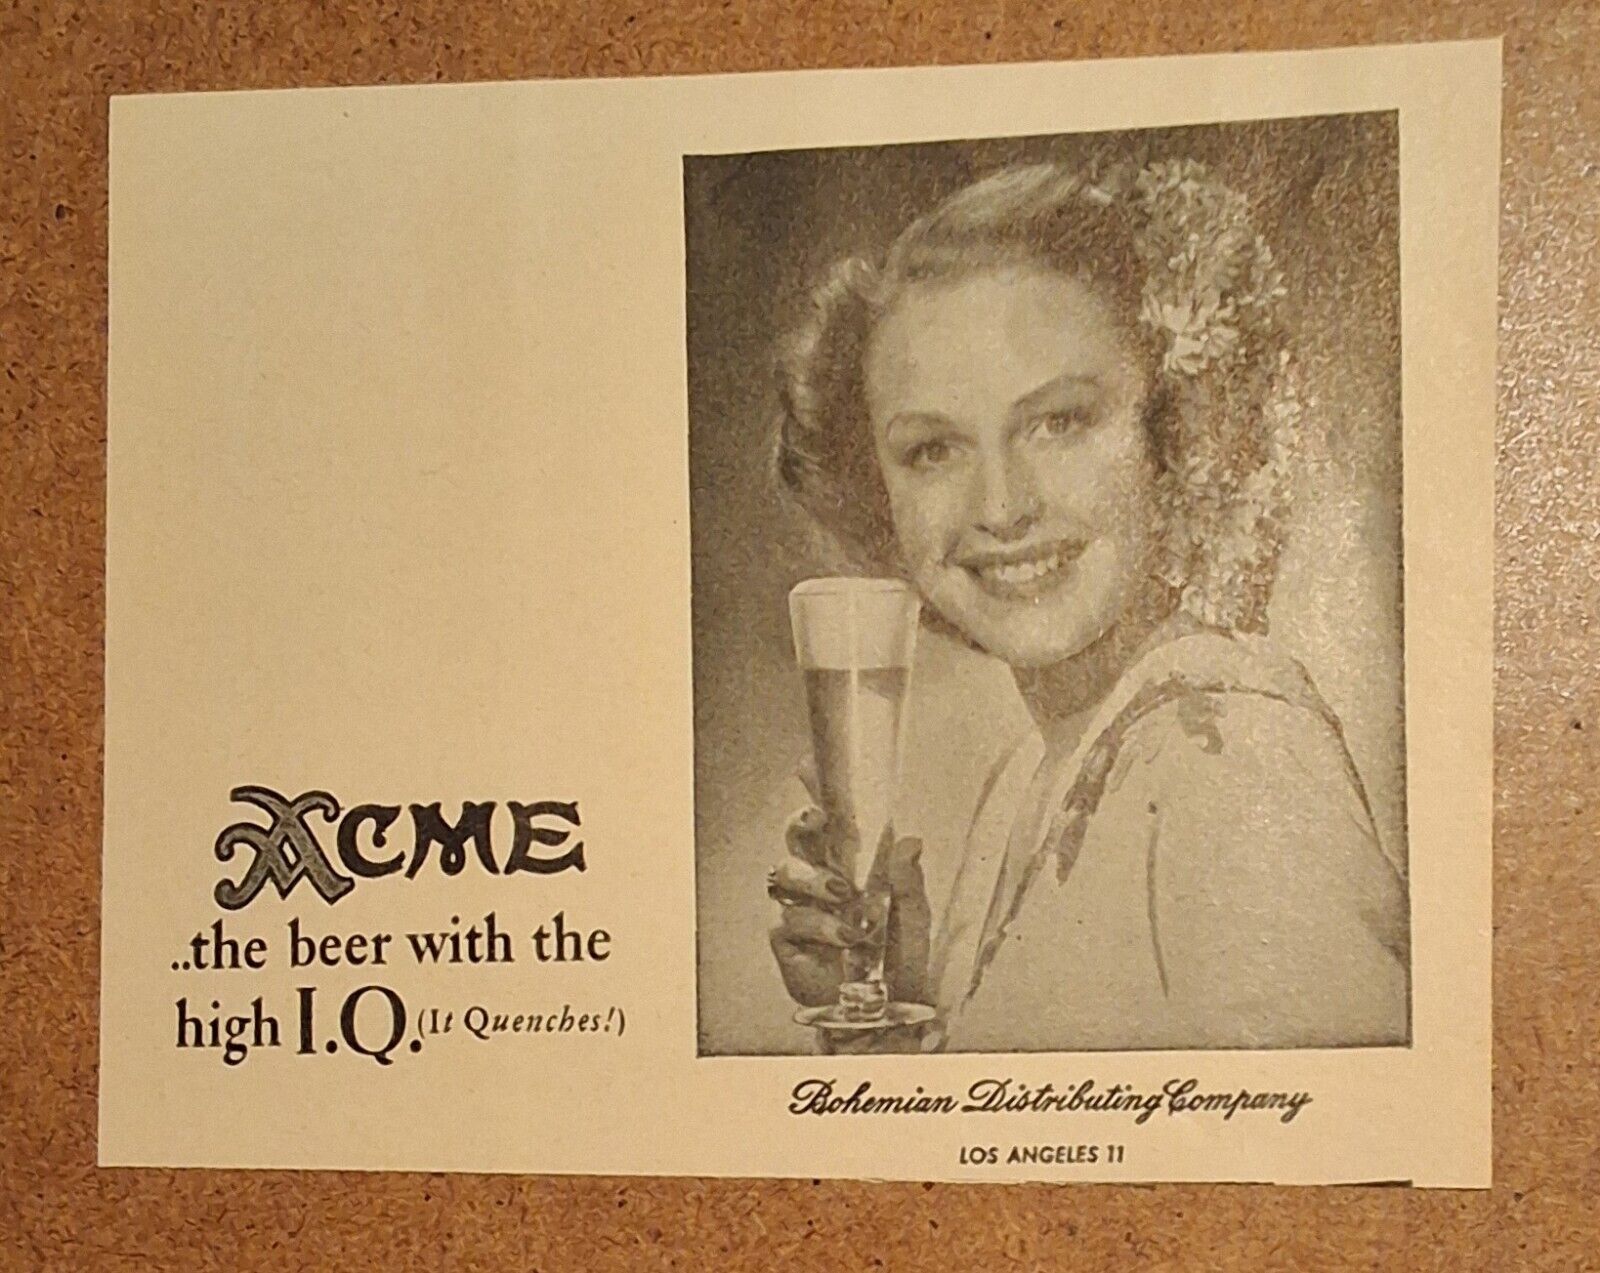 Vintage Alcohol Liquor Brewery Decor - Acme Beer Los Angeles - High IQ - 1946 AD